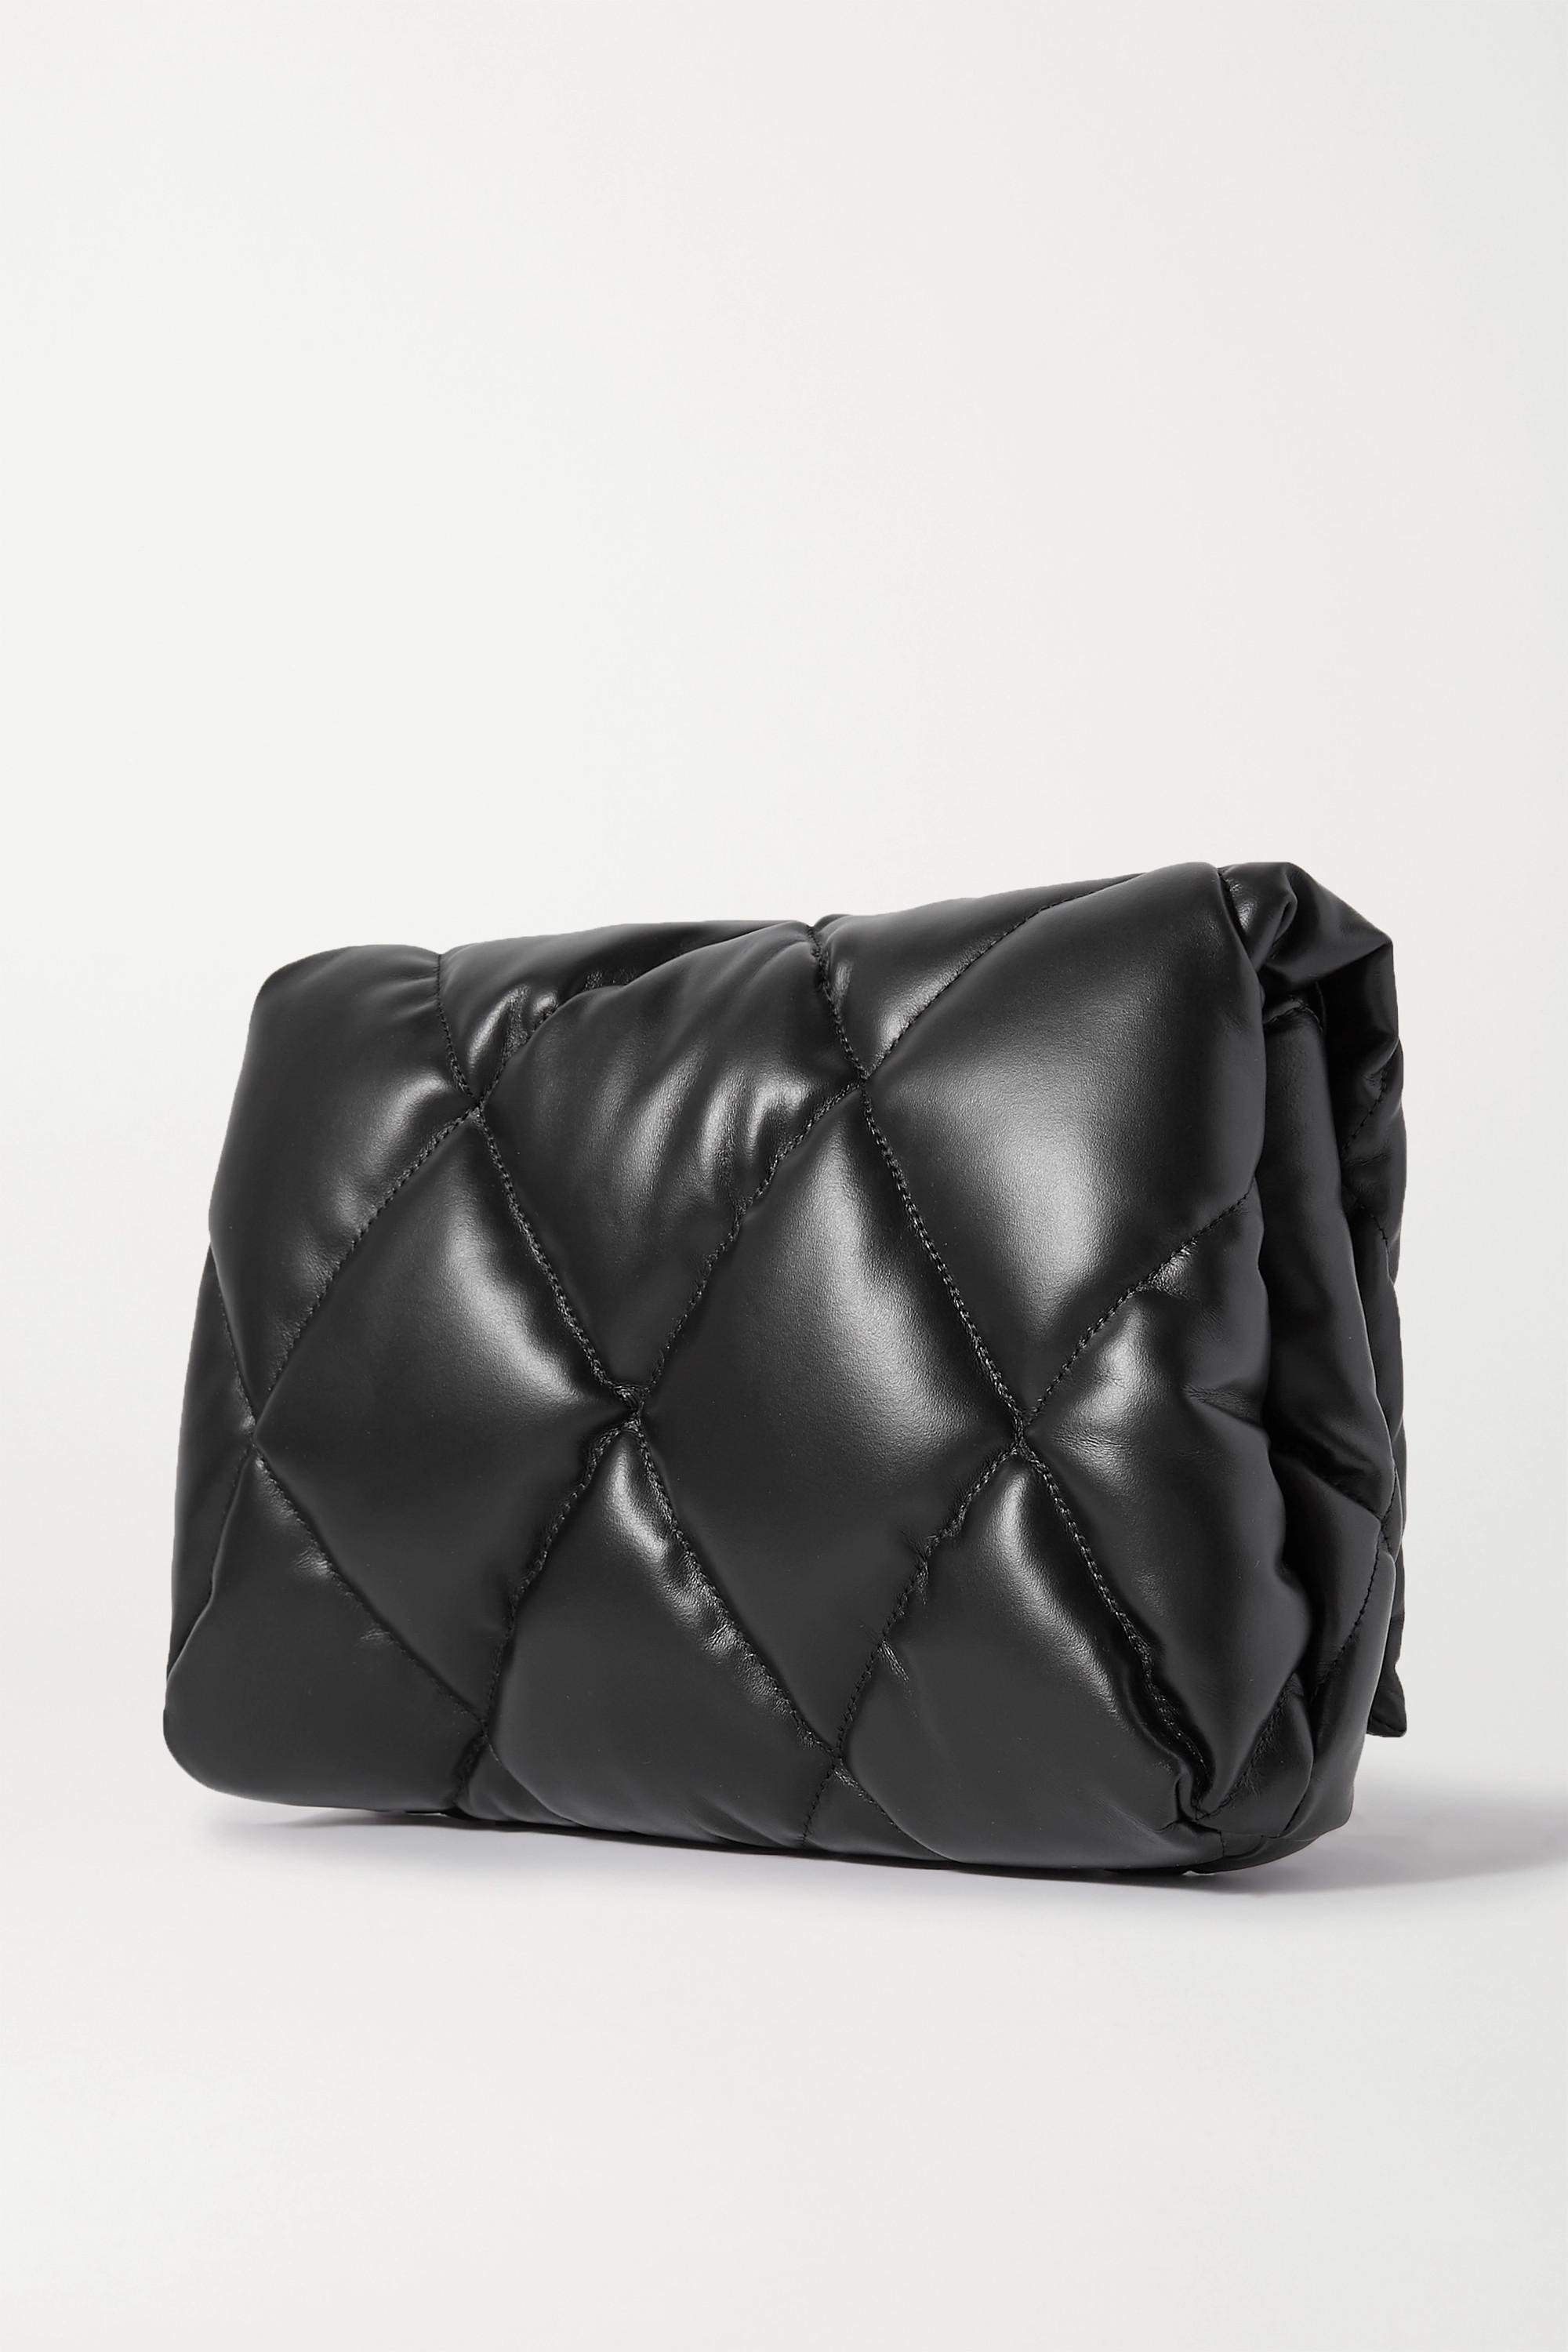 Balenciaga Touch Black Nappa Leather Quilted Puffy Clutch Bag 624947 – ZAK  BAGS ©️